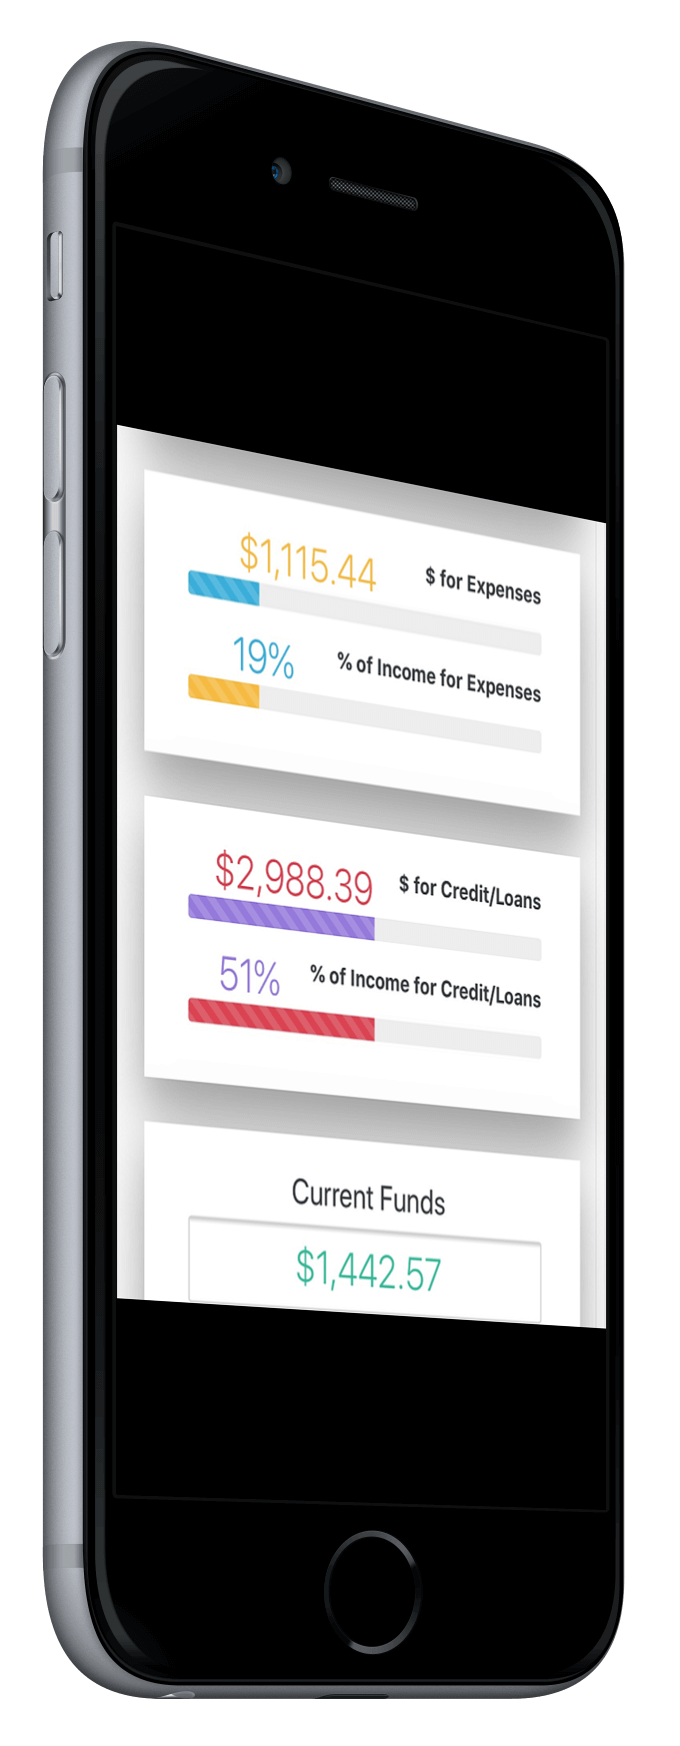 Accurately track your expenses and money spending